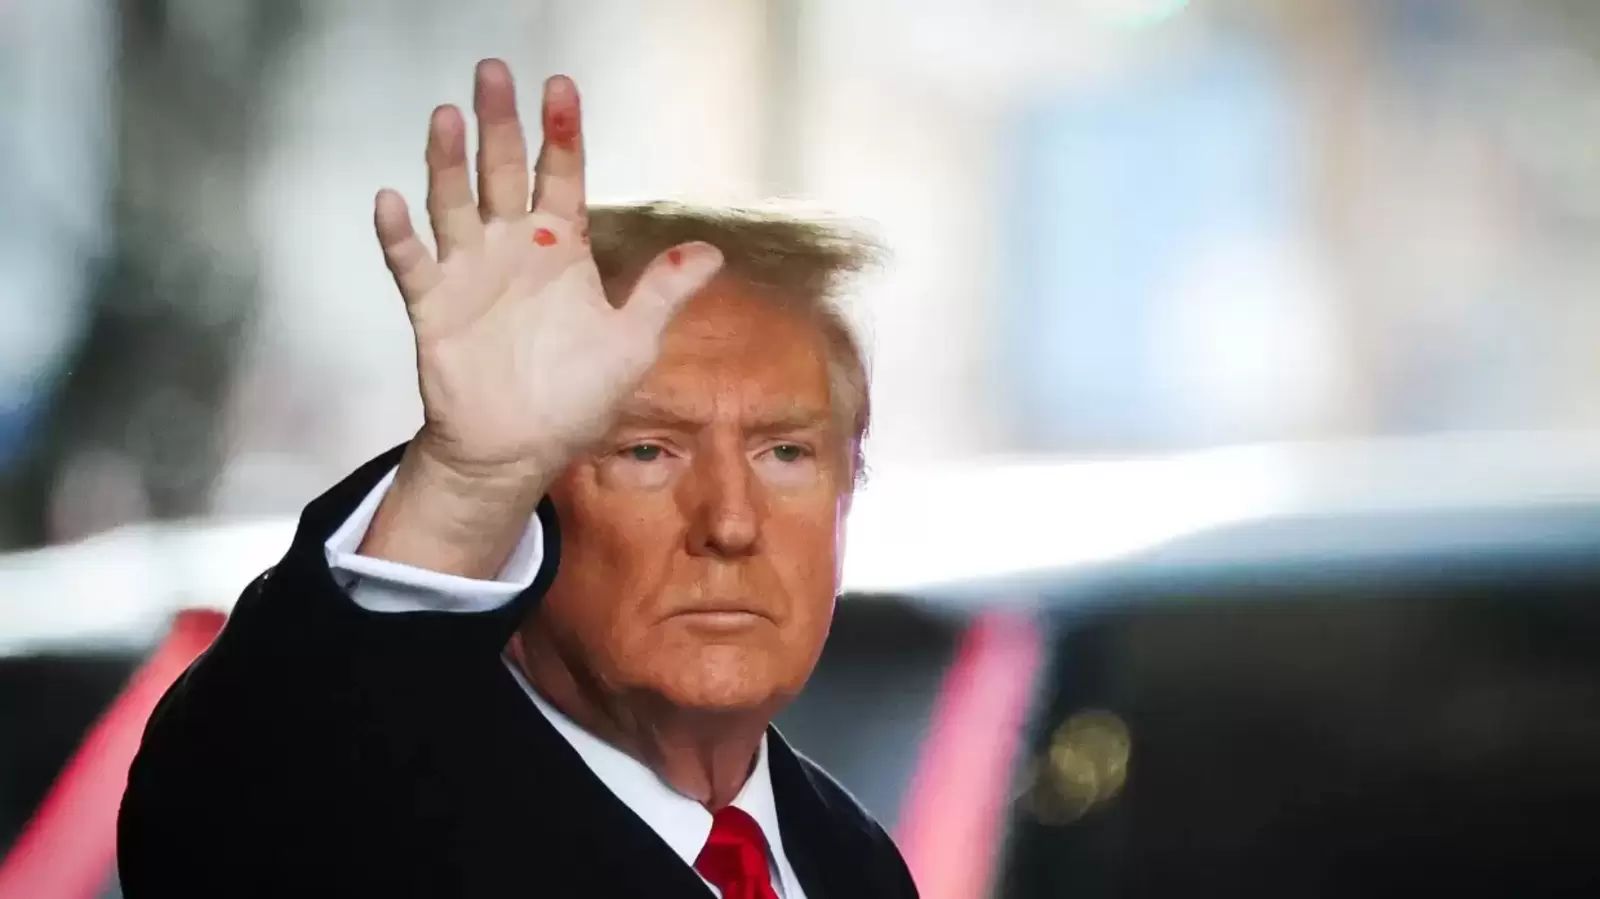 Donald Trump’s Mysterious Red Hand Revealed To Be A Simple Paper Cut